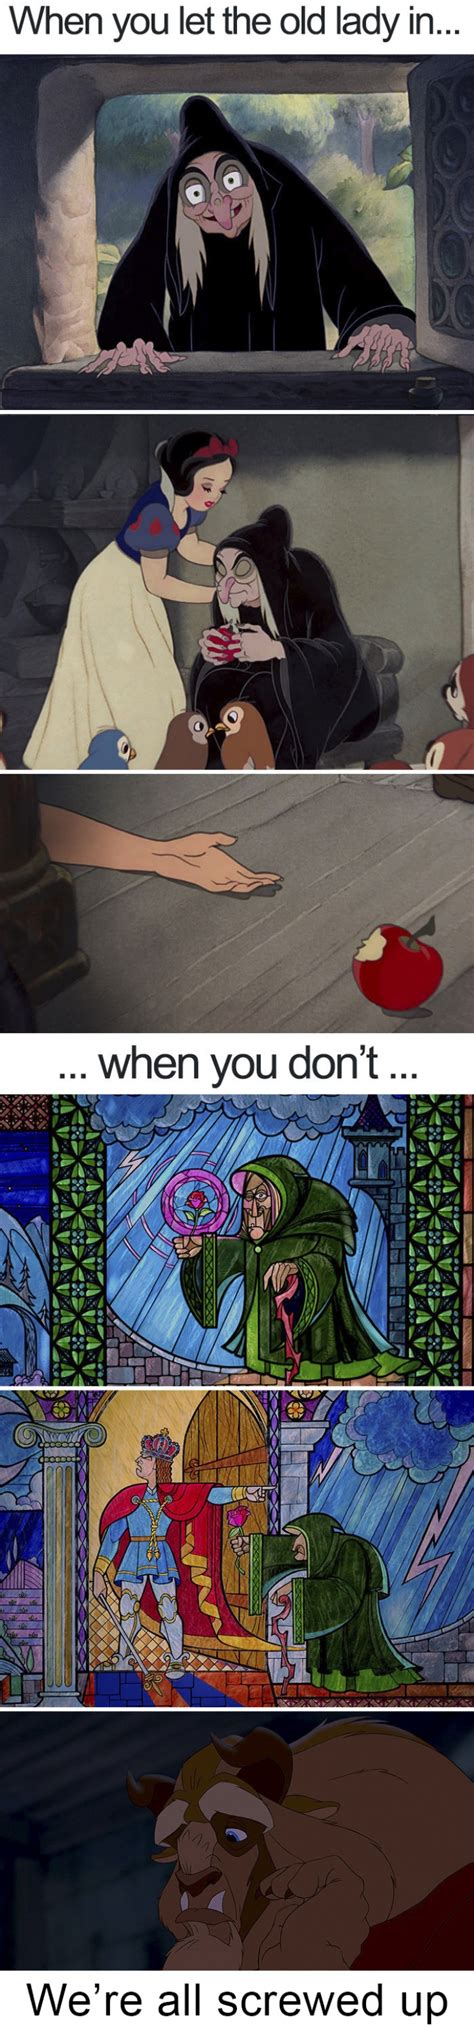 32 Funny Disney Memes That Will Make You Laugh Twblowmymind